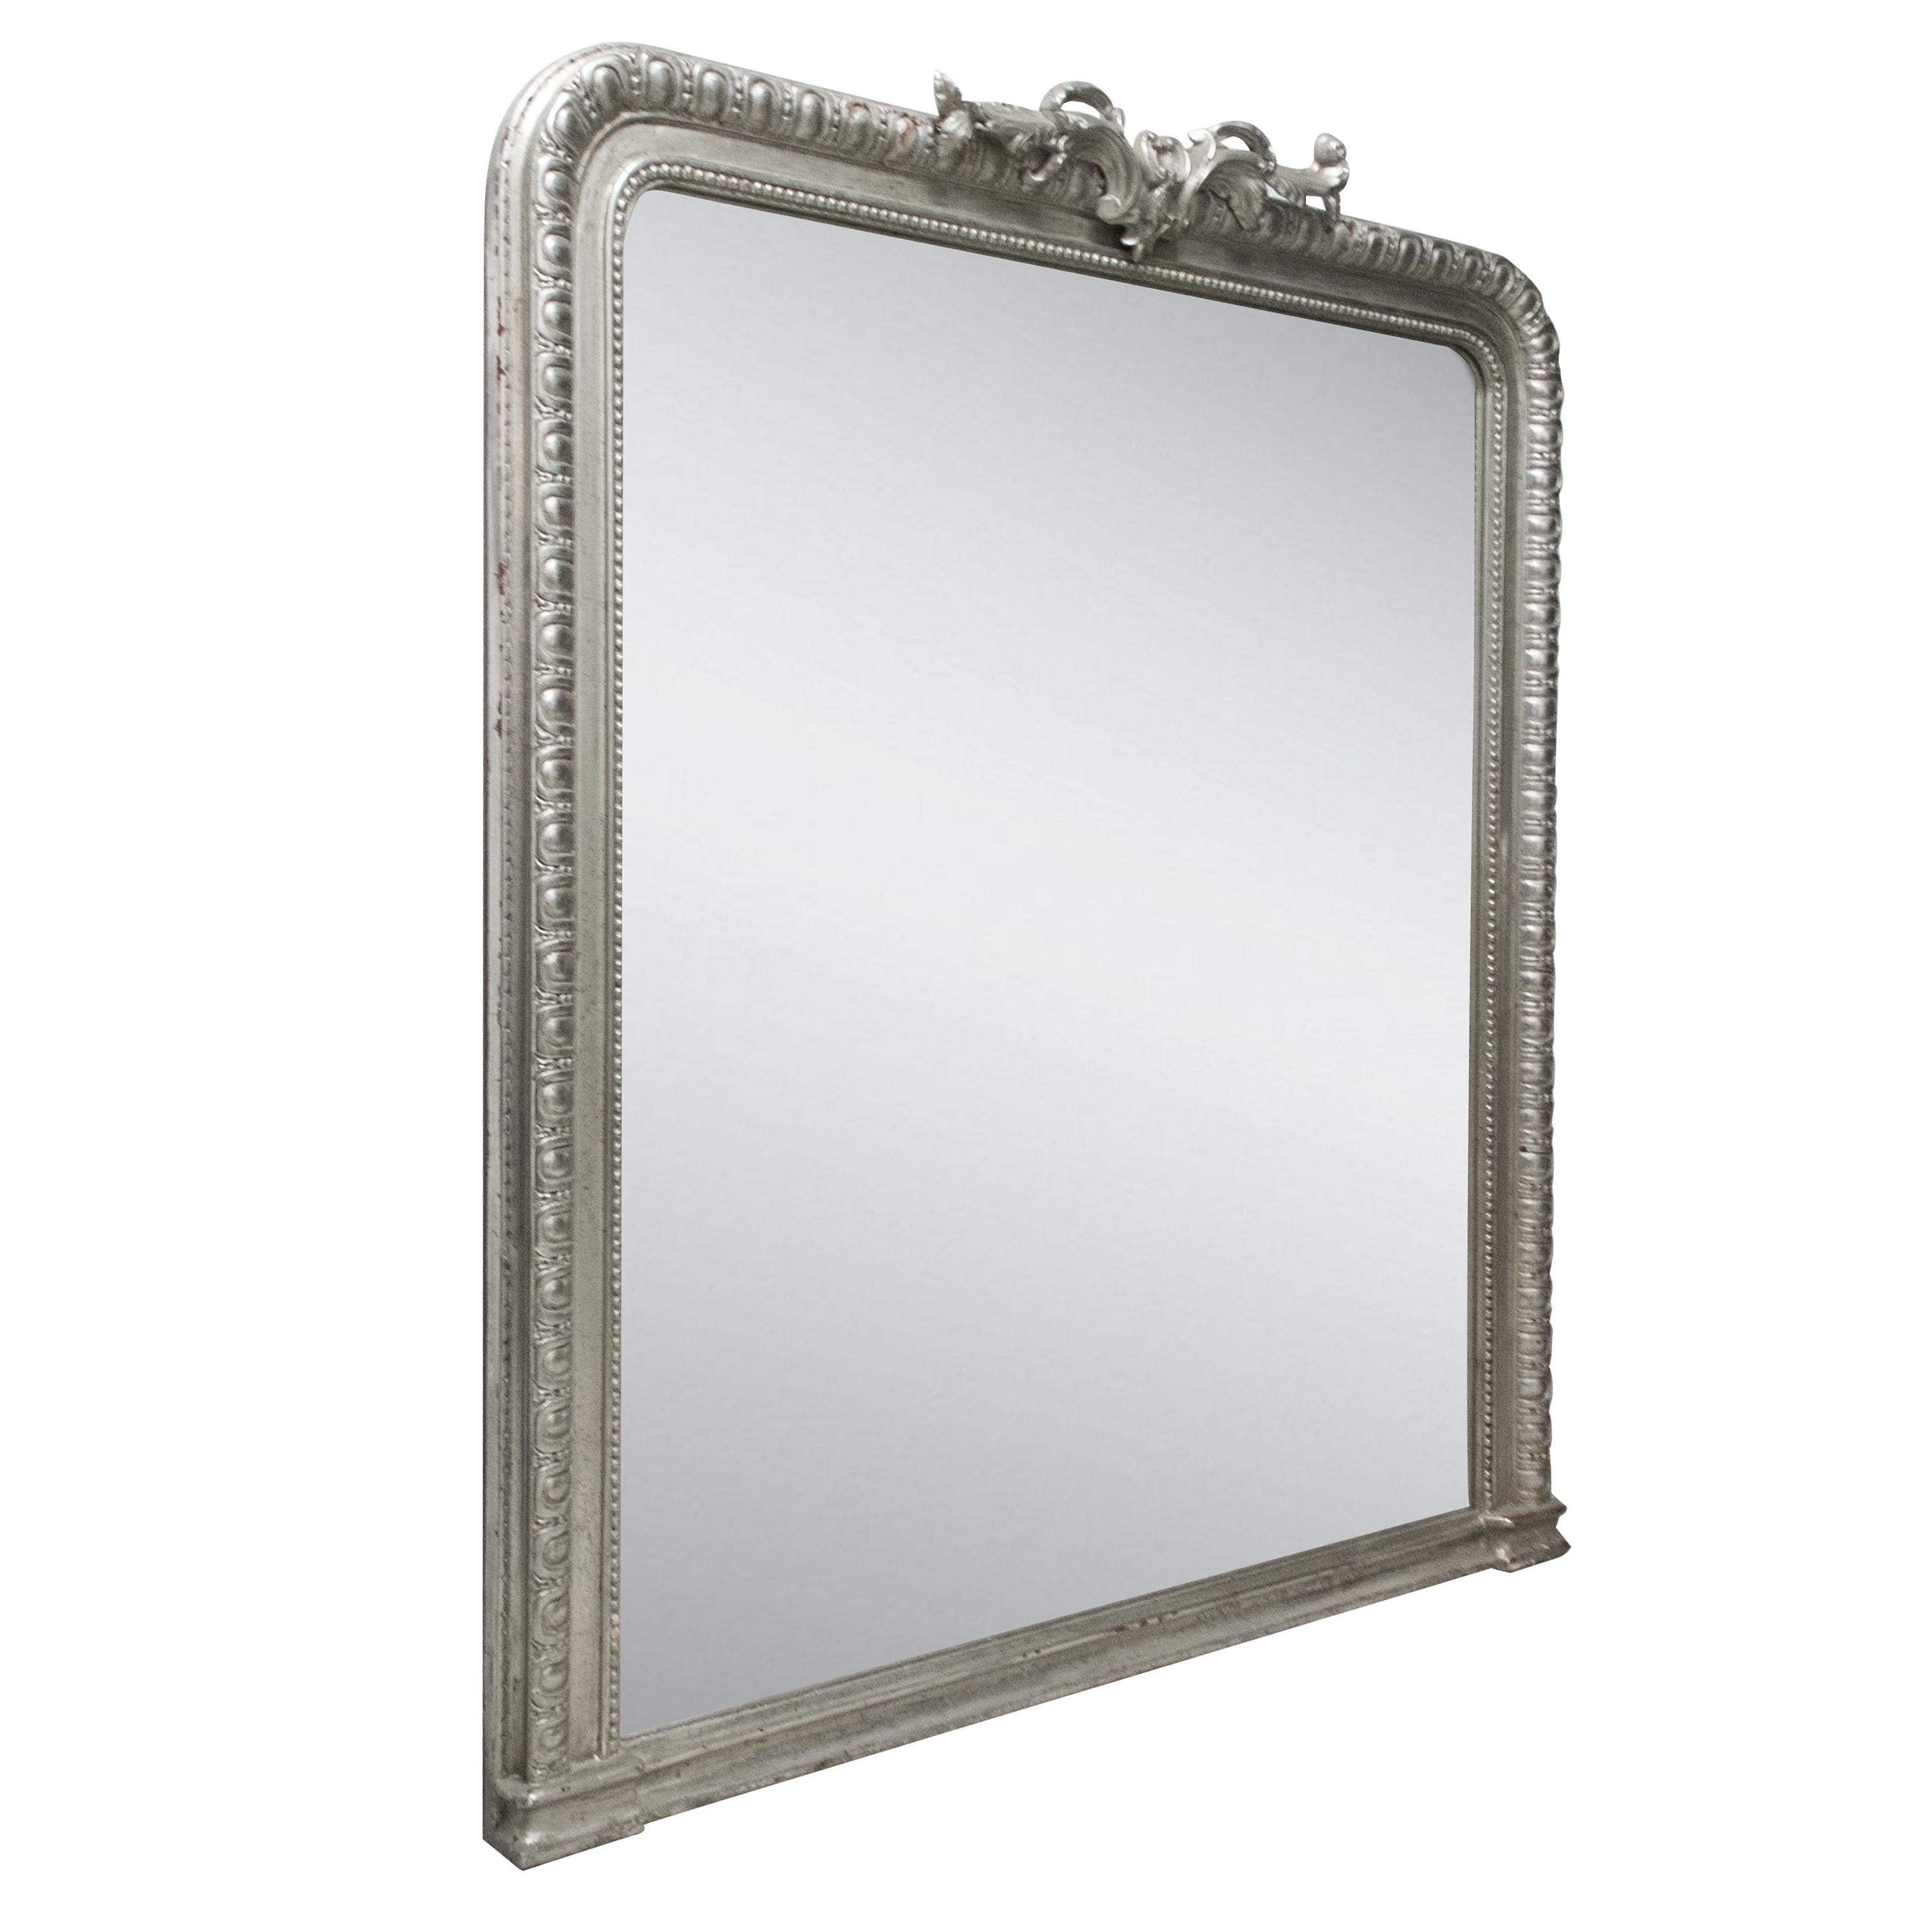 Neoclassical Regency style handcrafted mirror. Rectangular hand carved wooden structure with silver foiled finish. Spain, 1970.